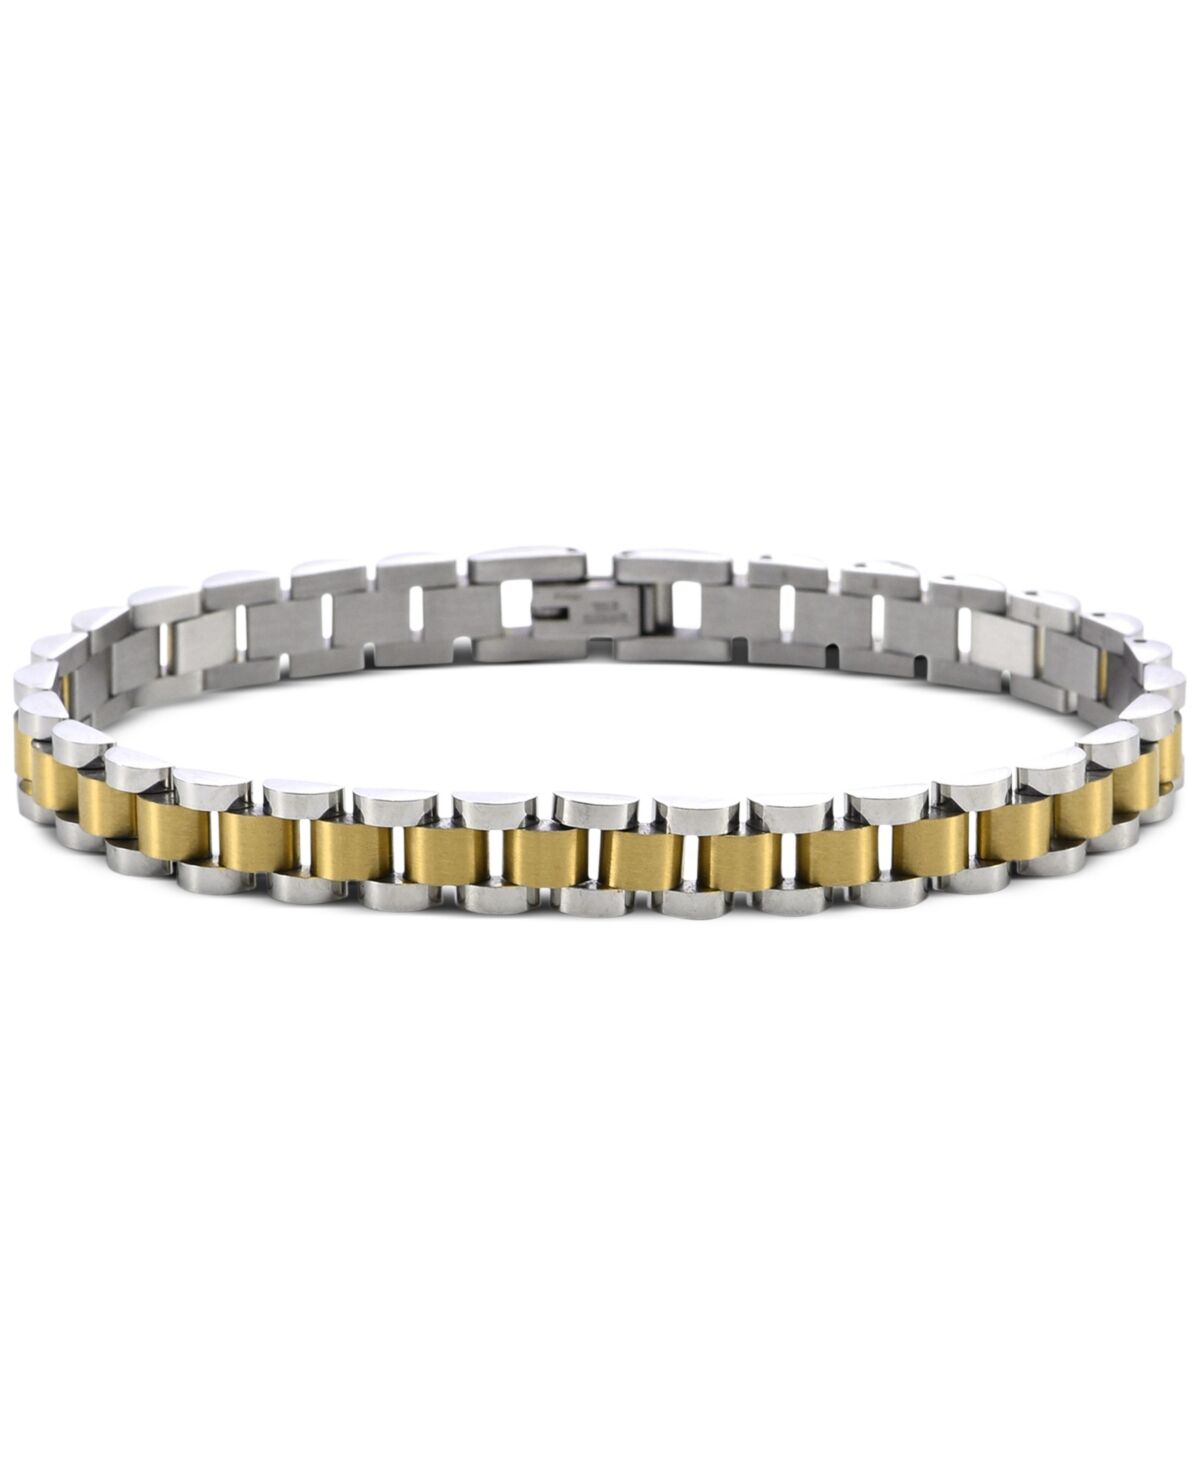 Macy's Men's Two-Tone Watch Link Chain Bracelet in Stainless Steel & Gold-Tone Ion-Plate - Two-Tone